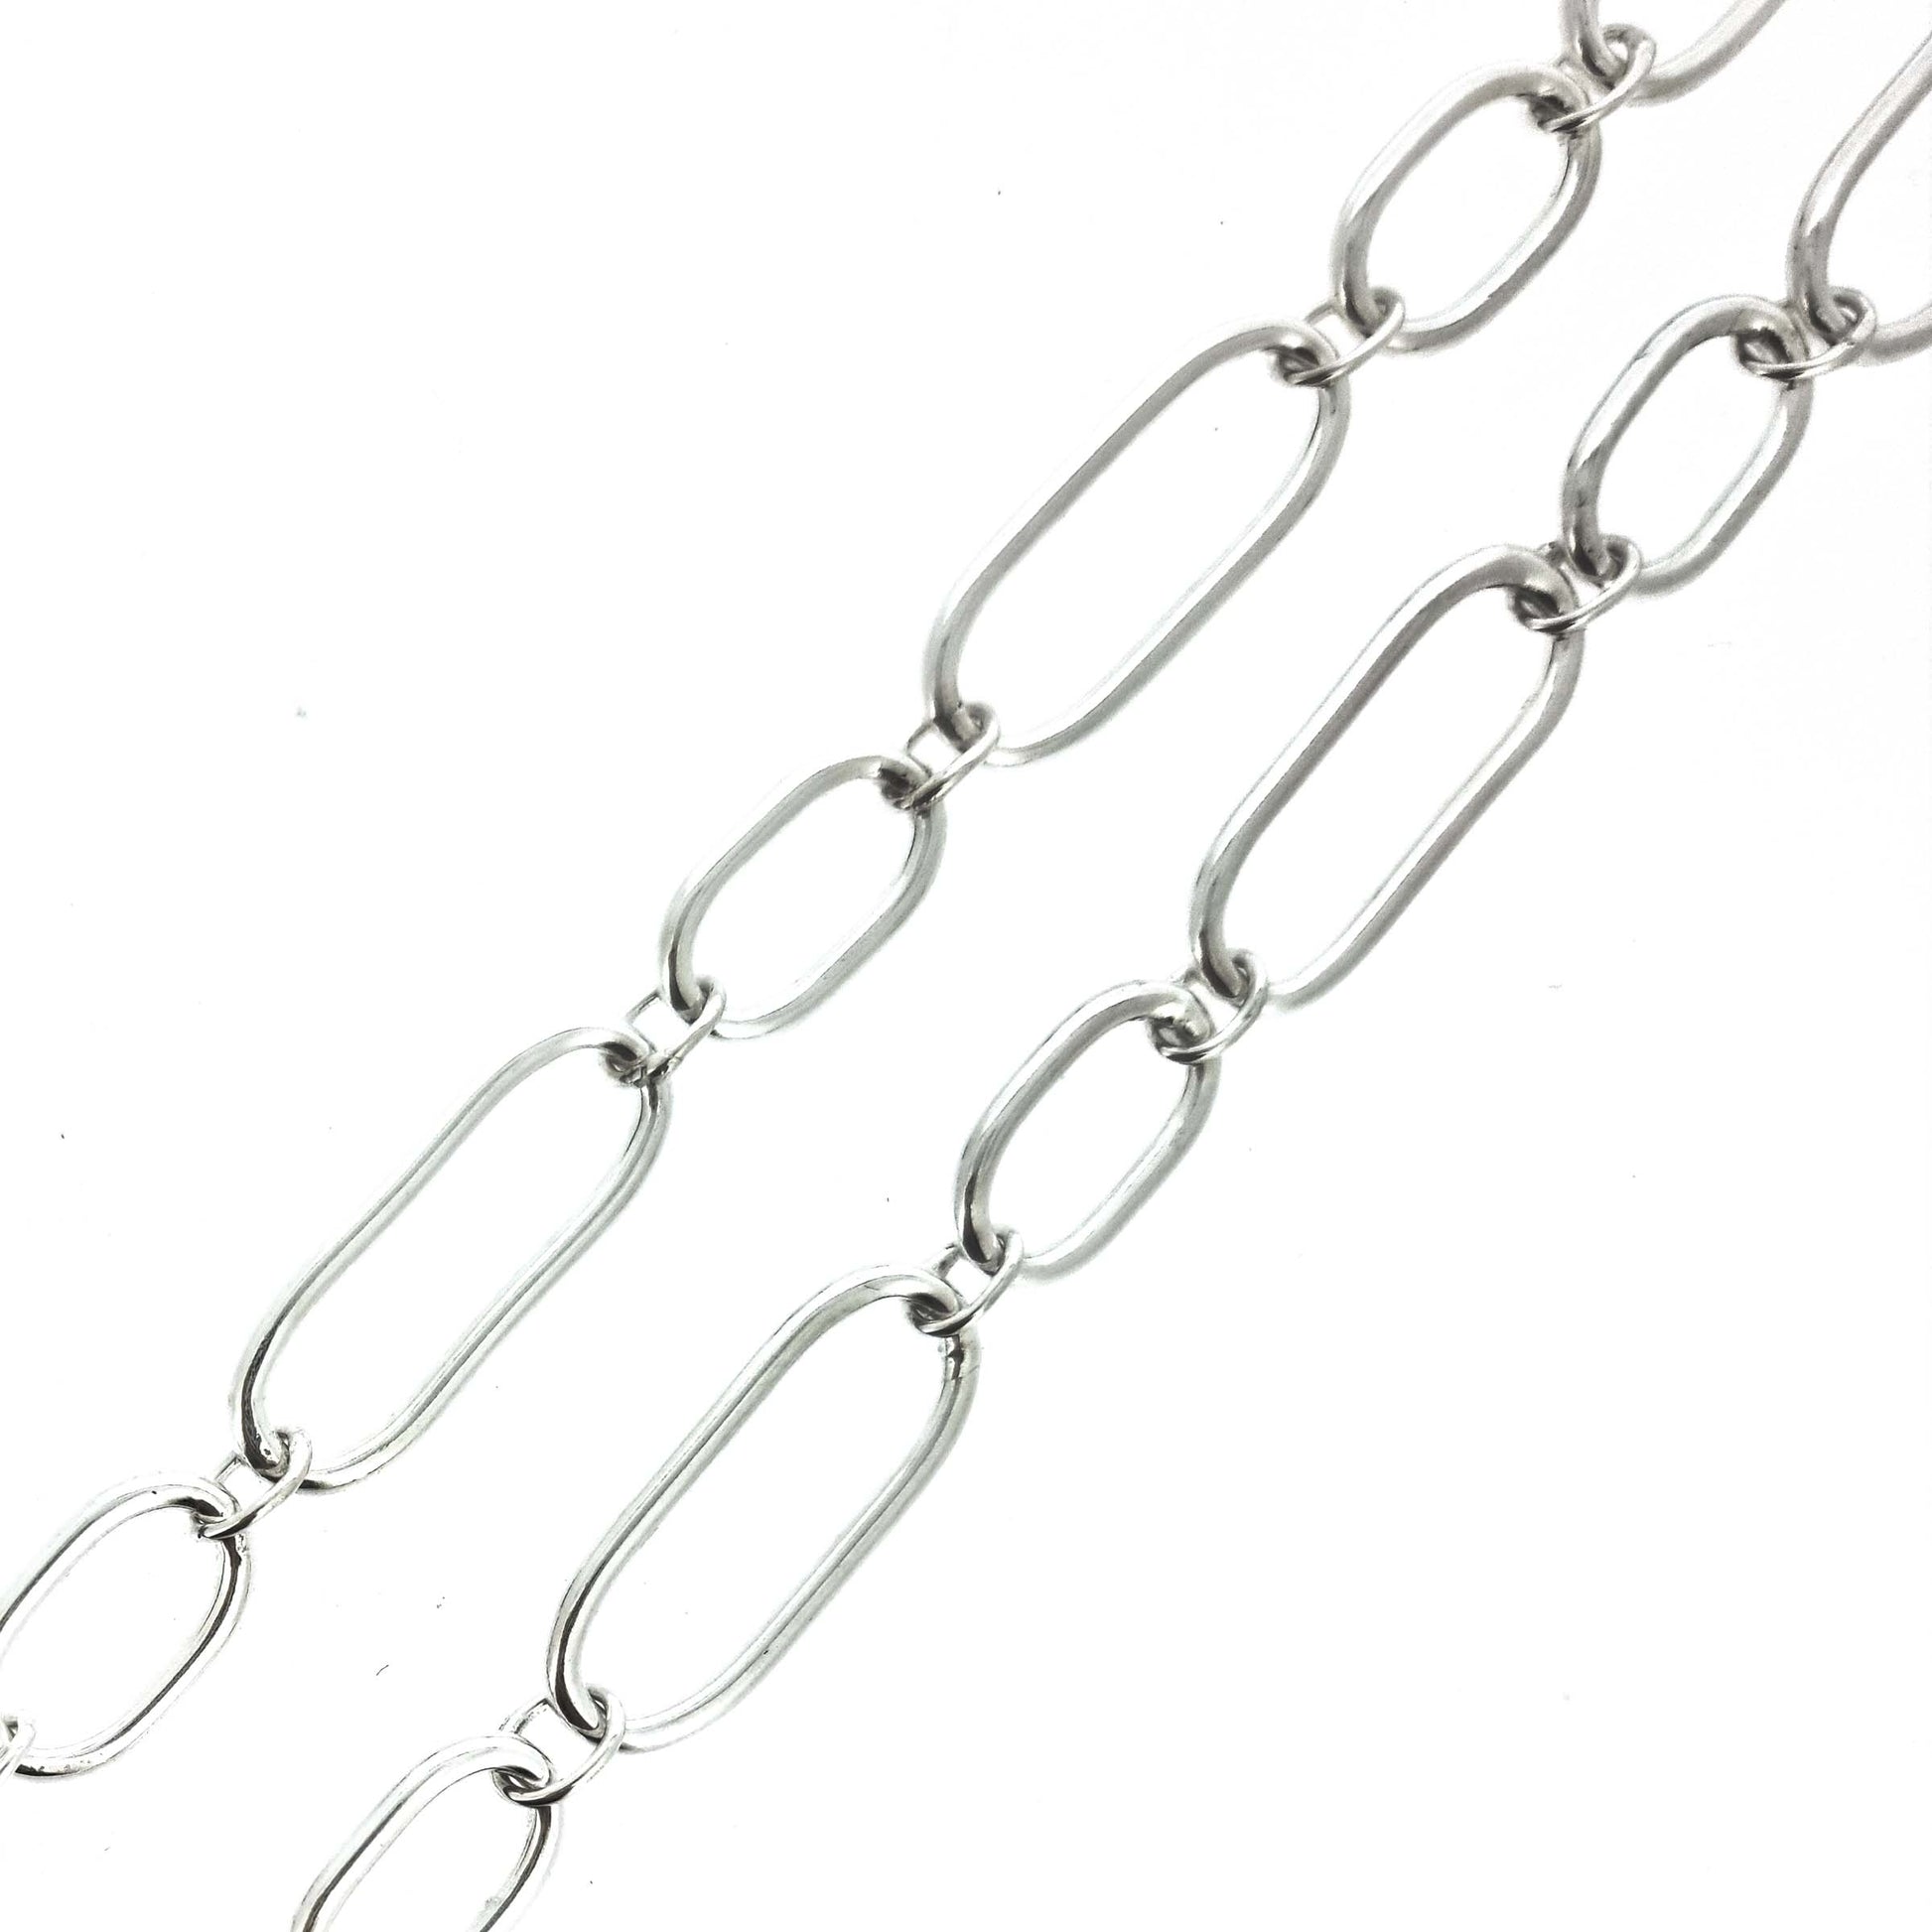 Silver chain bracelet with oblong links of different sizes.